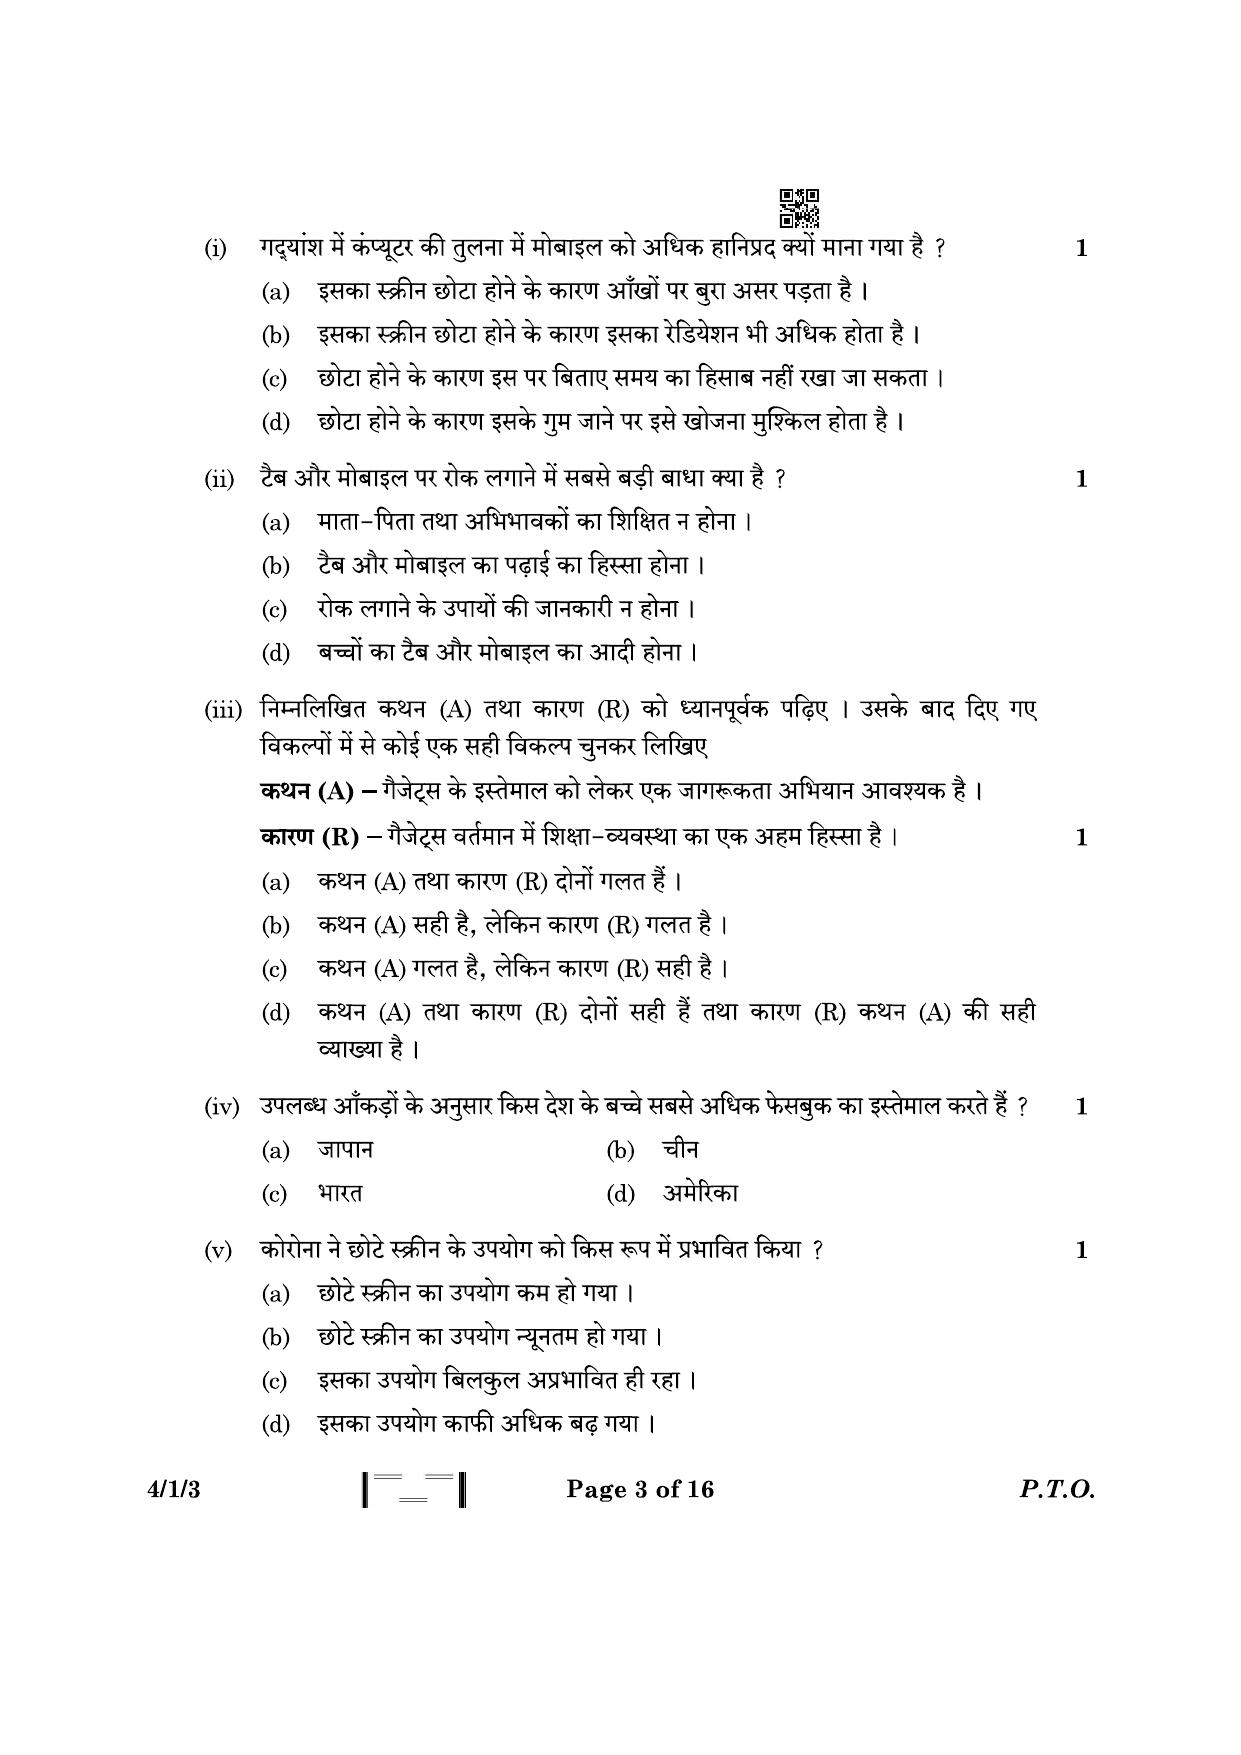 CBSE Class 10 4-1-3 Hindi B 2023 Question Paper - Page 3